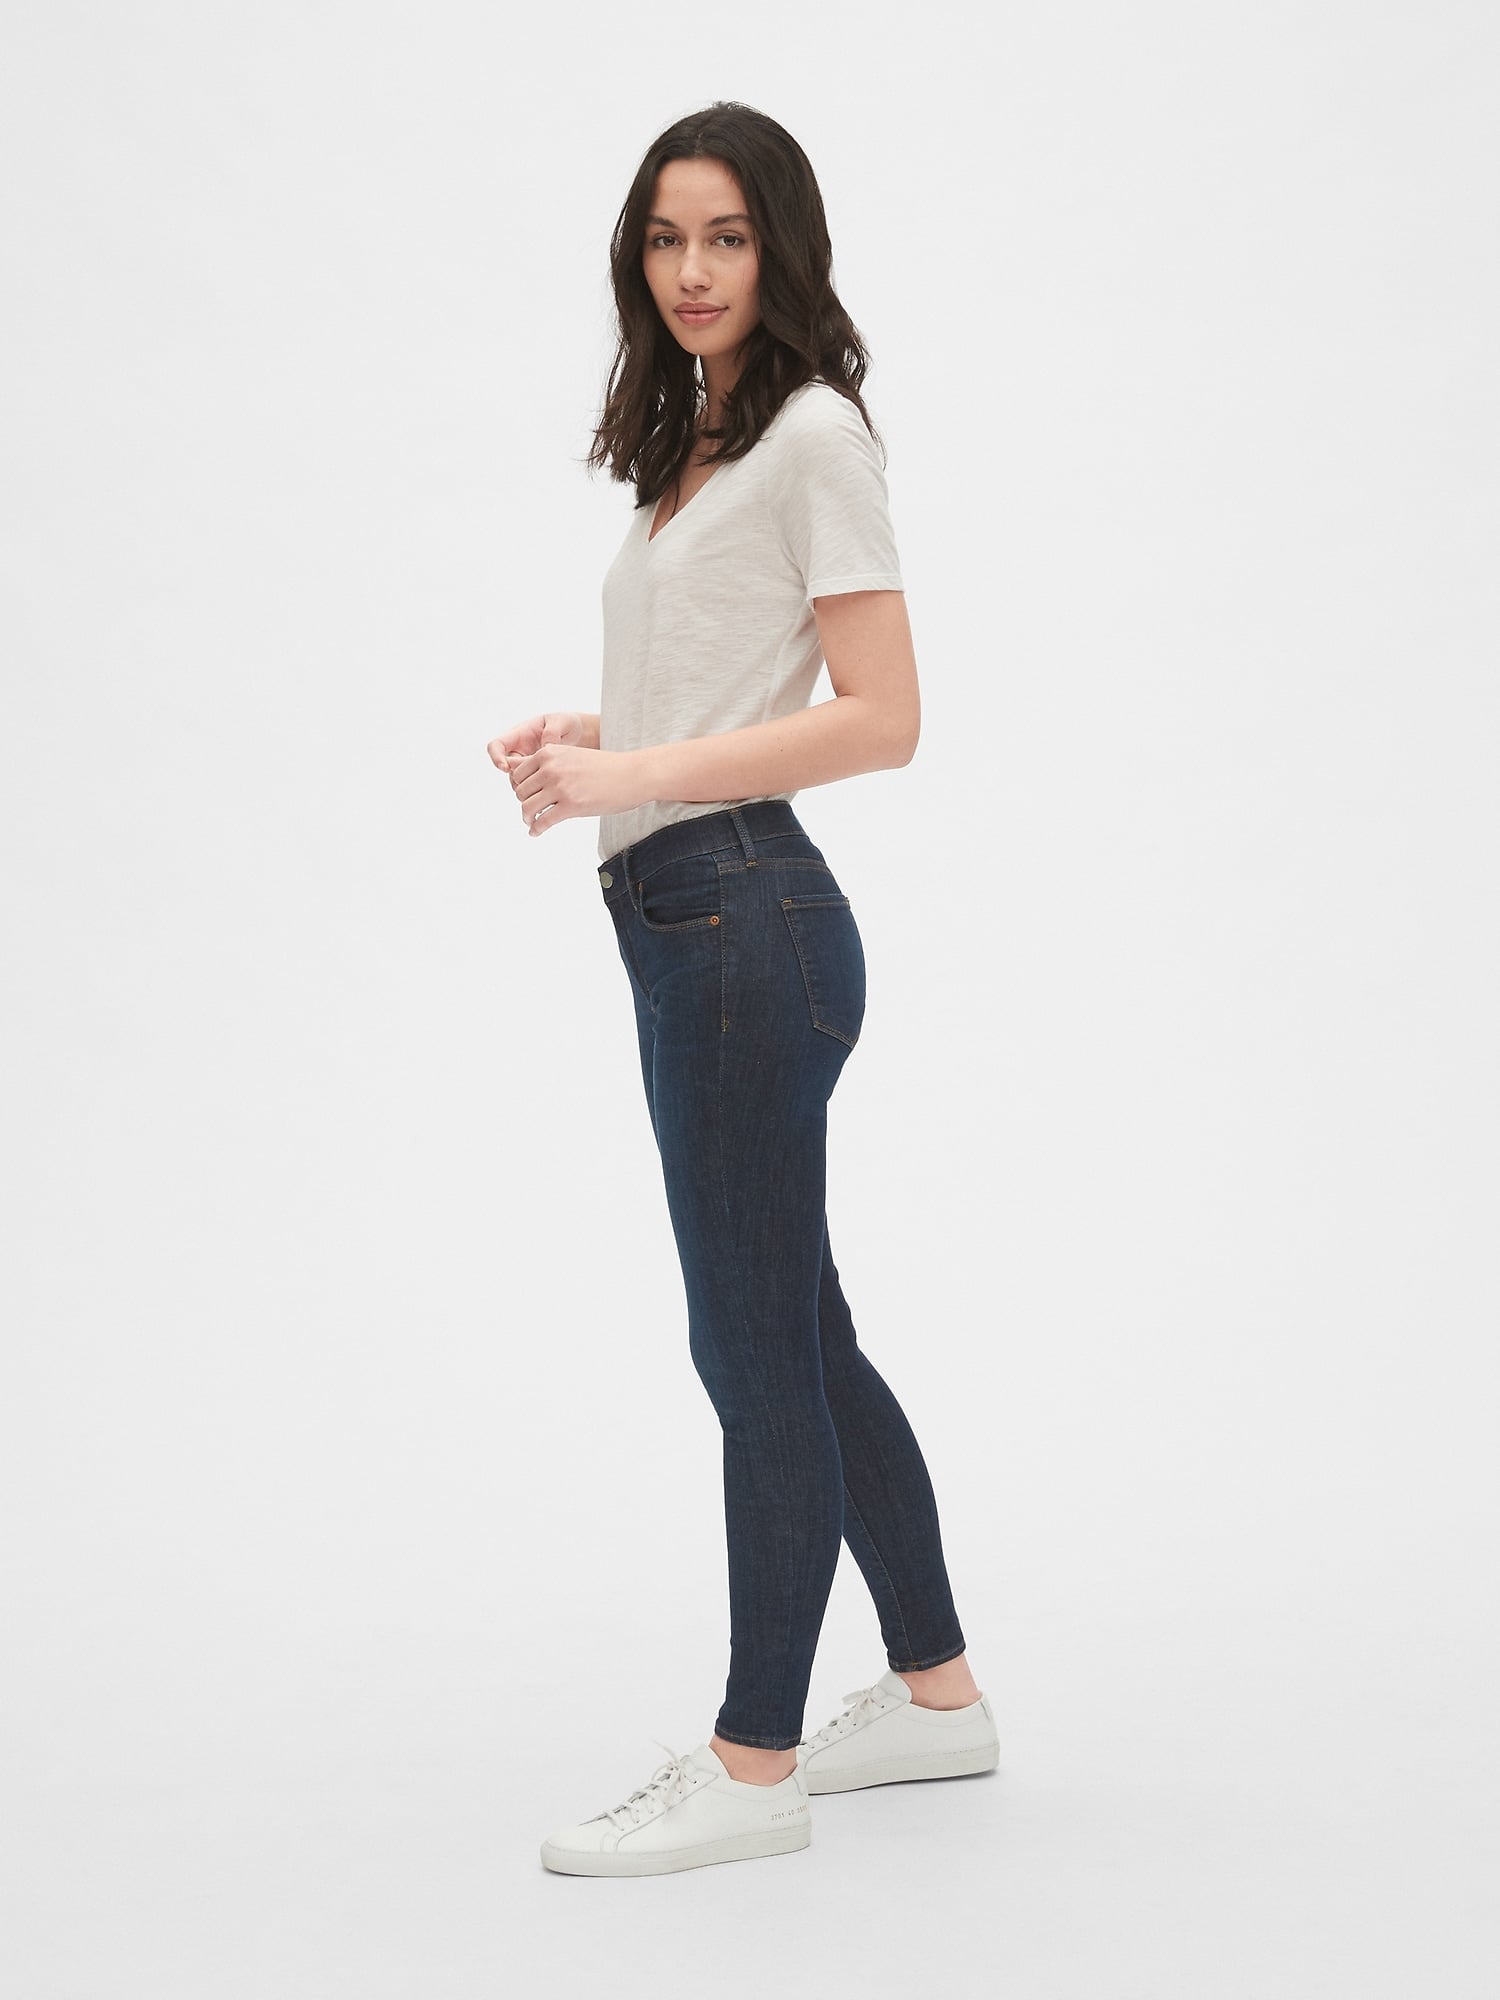 Gap Mid Rise True Skinny Jeans in Sculpt These Iconic $80 Jeans Have Been My Go-To Pair For Over a Decade | POPSUGAR Fashion Photo 5